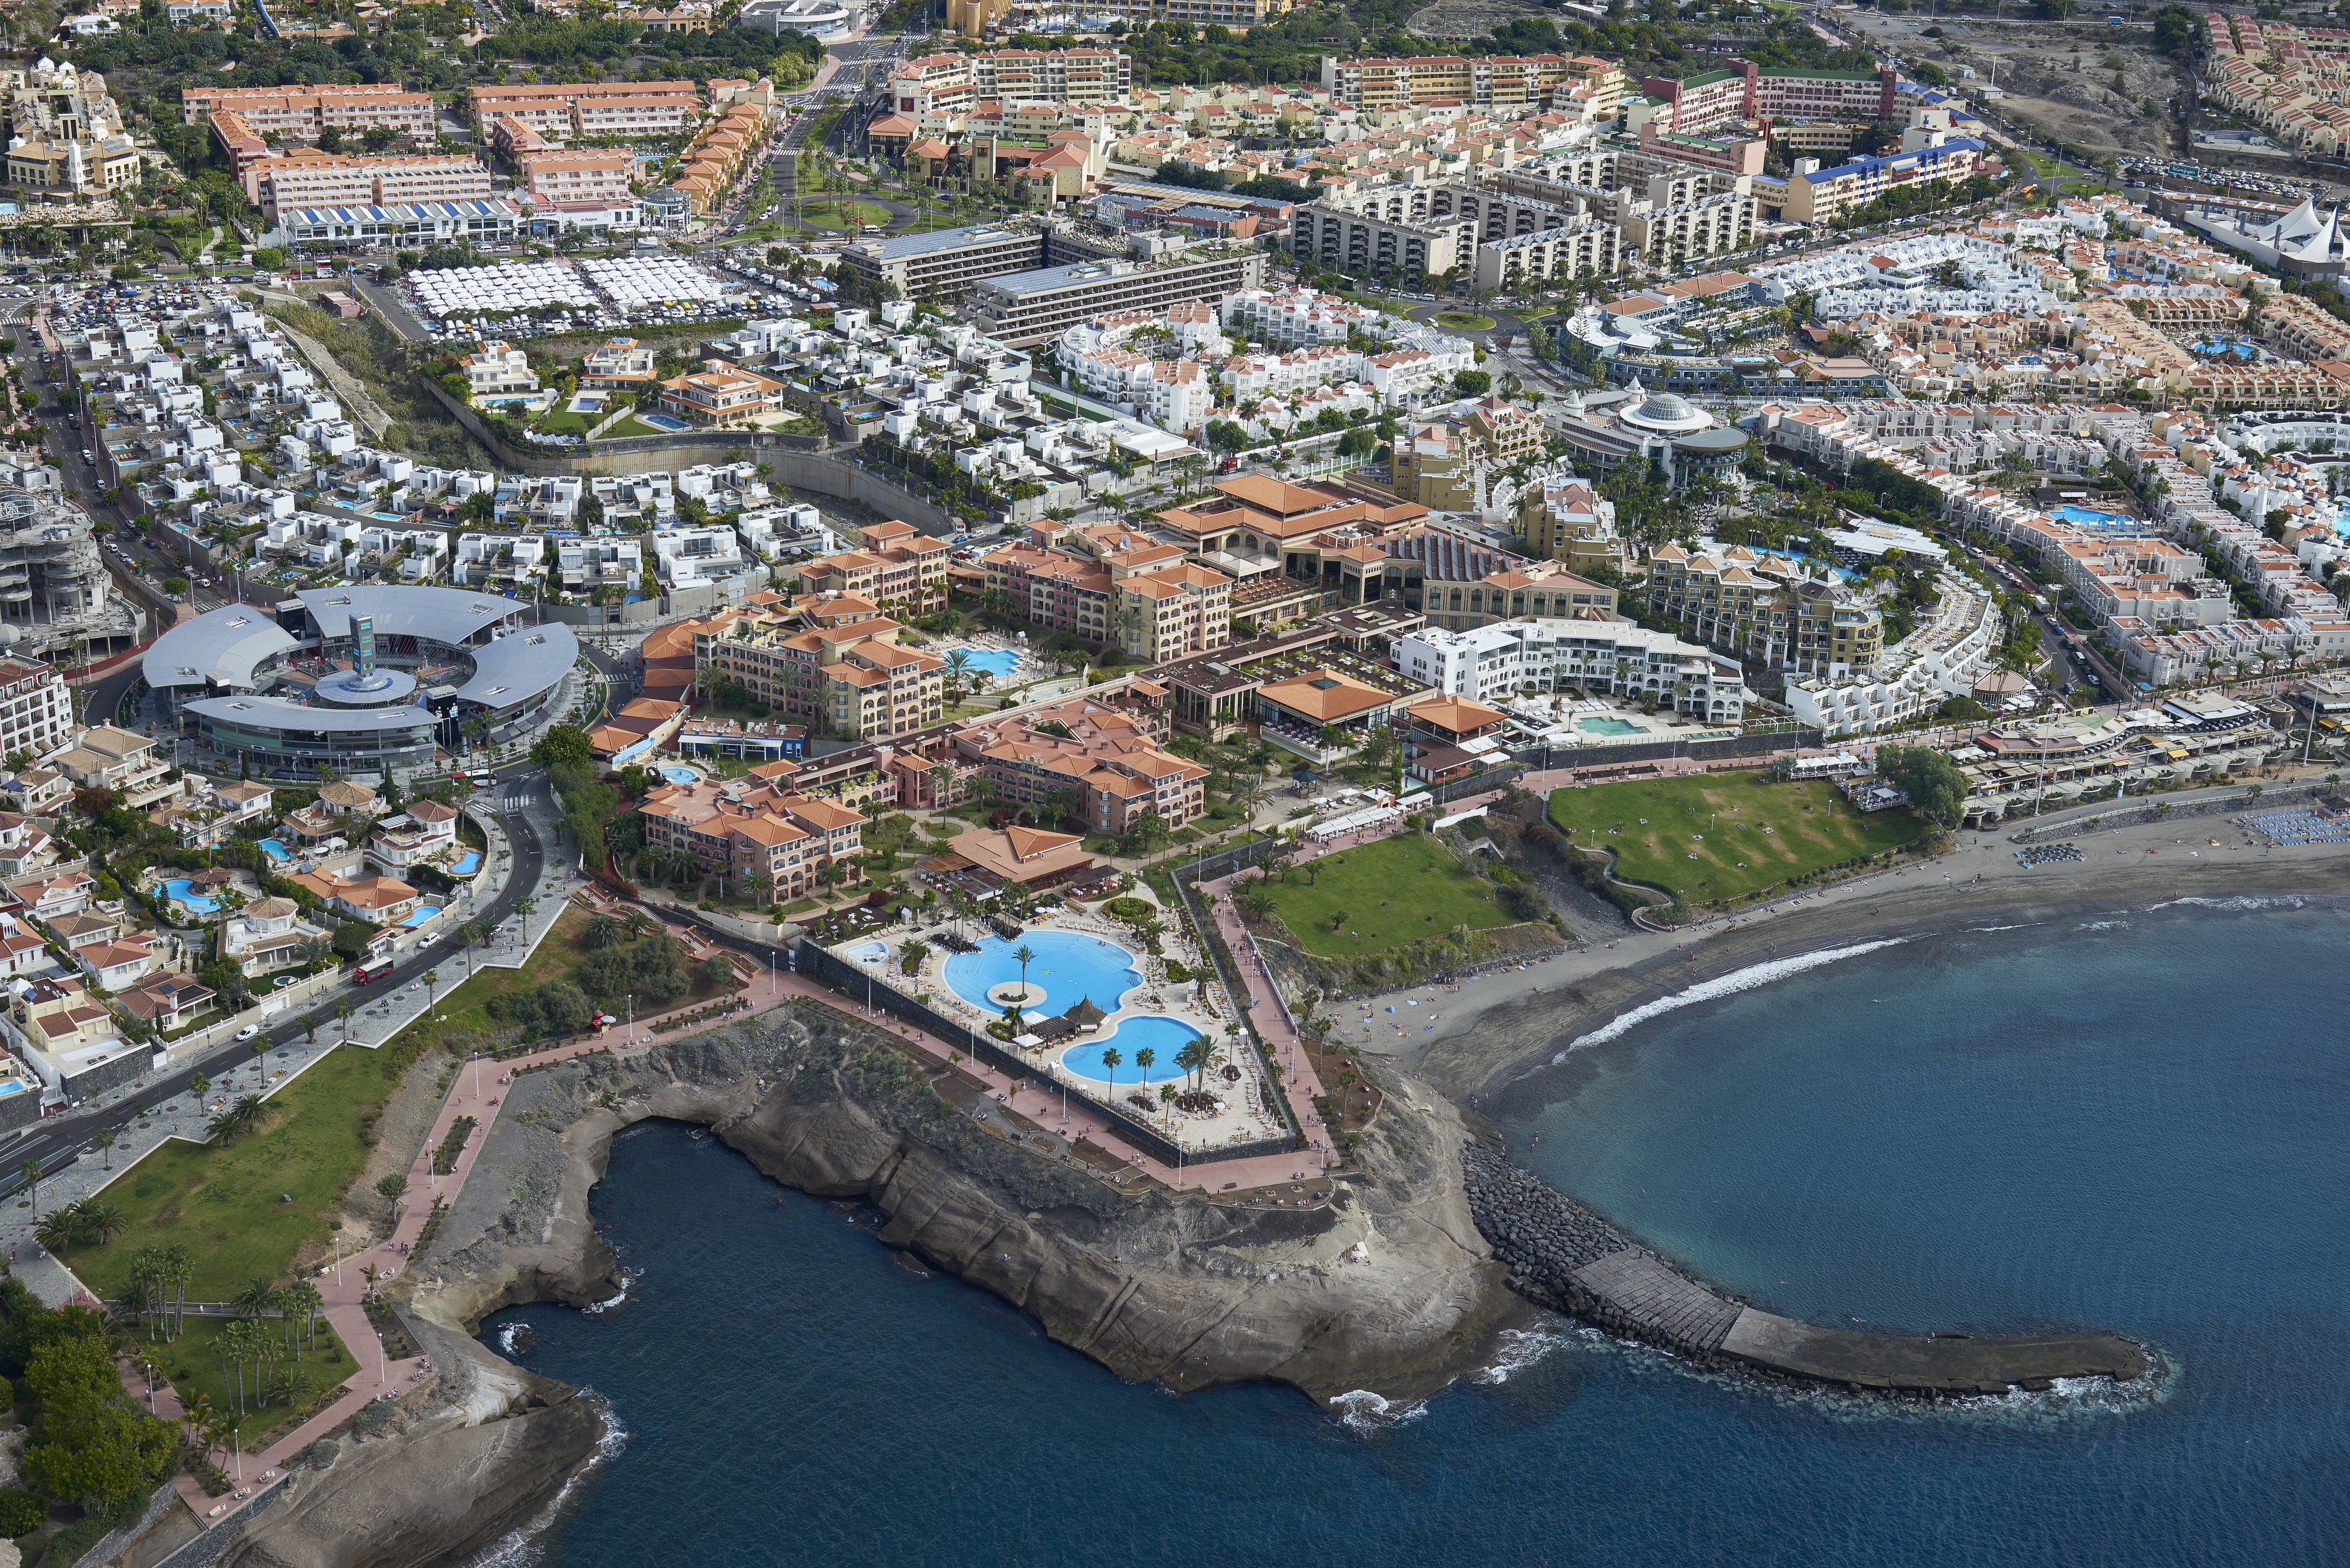 A0417 Tenerife, Hotels in Adeje aerial view